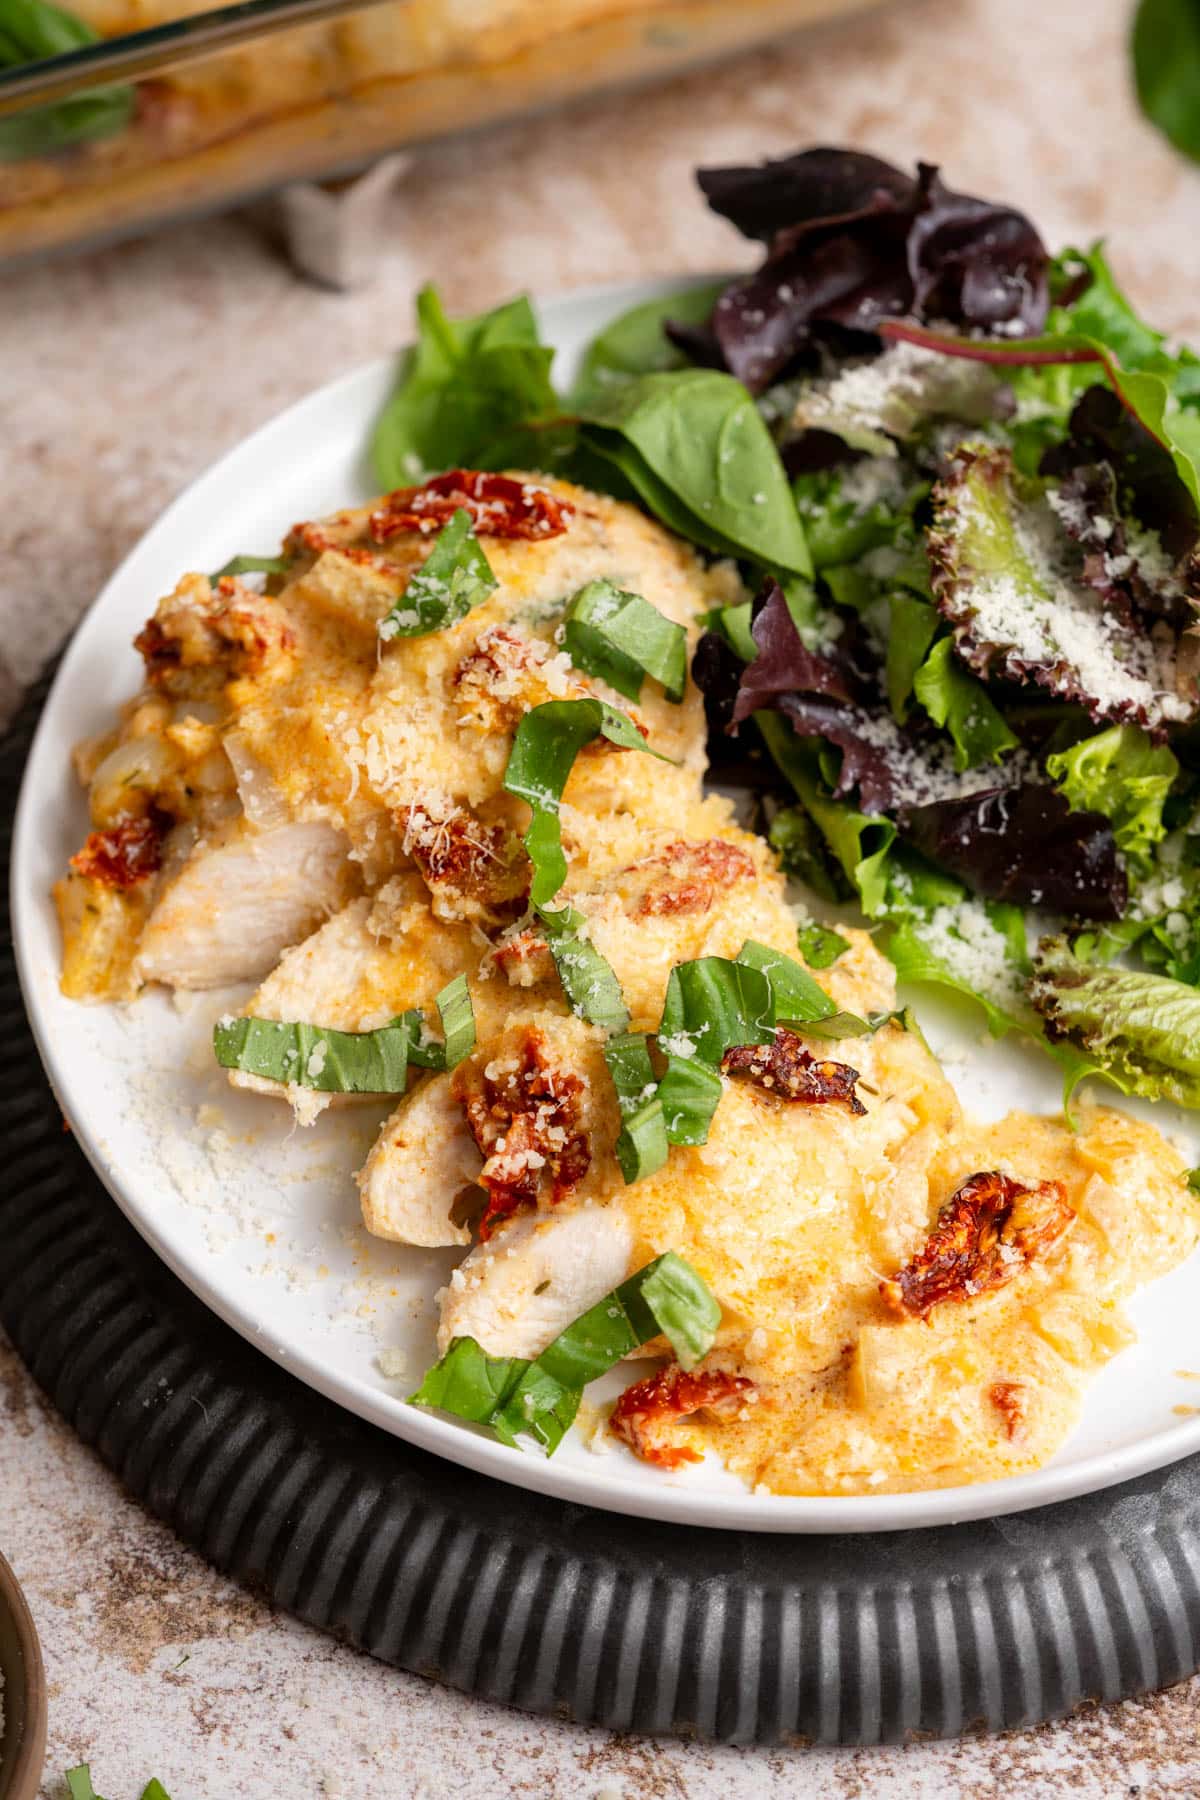 Sliced tuscan chicken on a plate with a green salad.